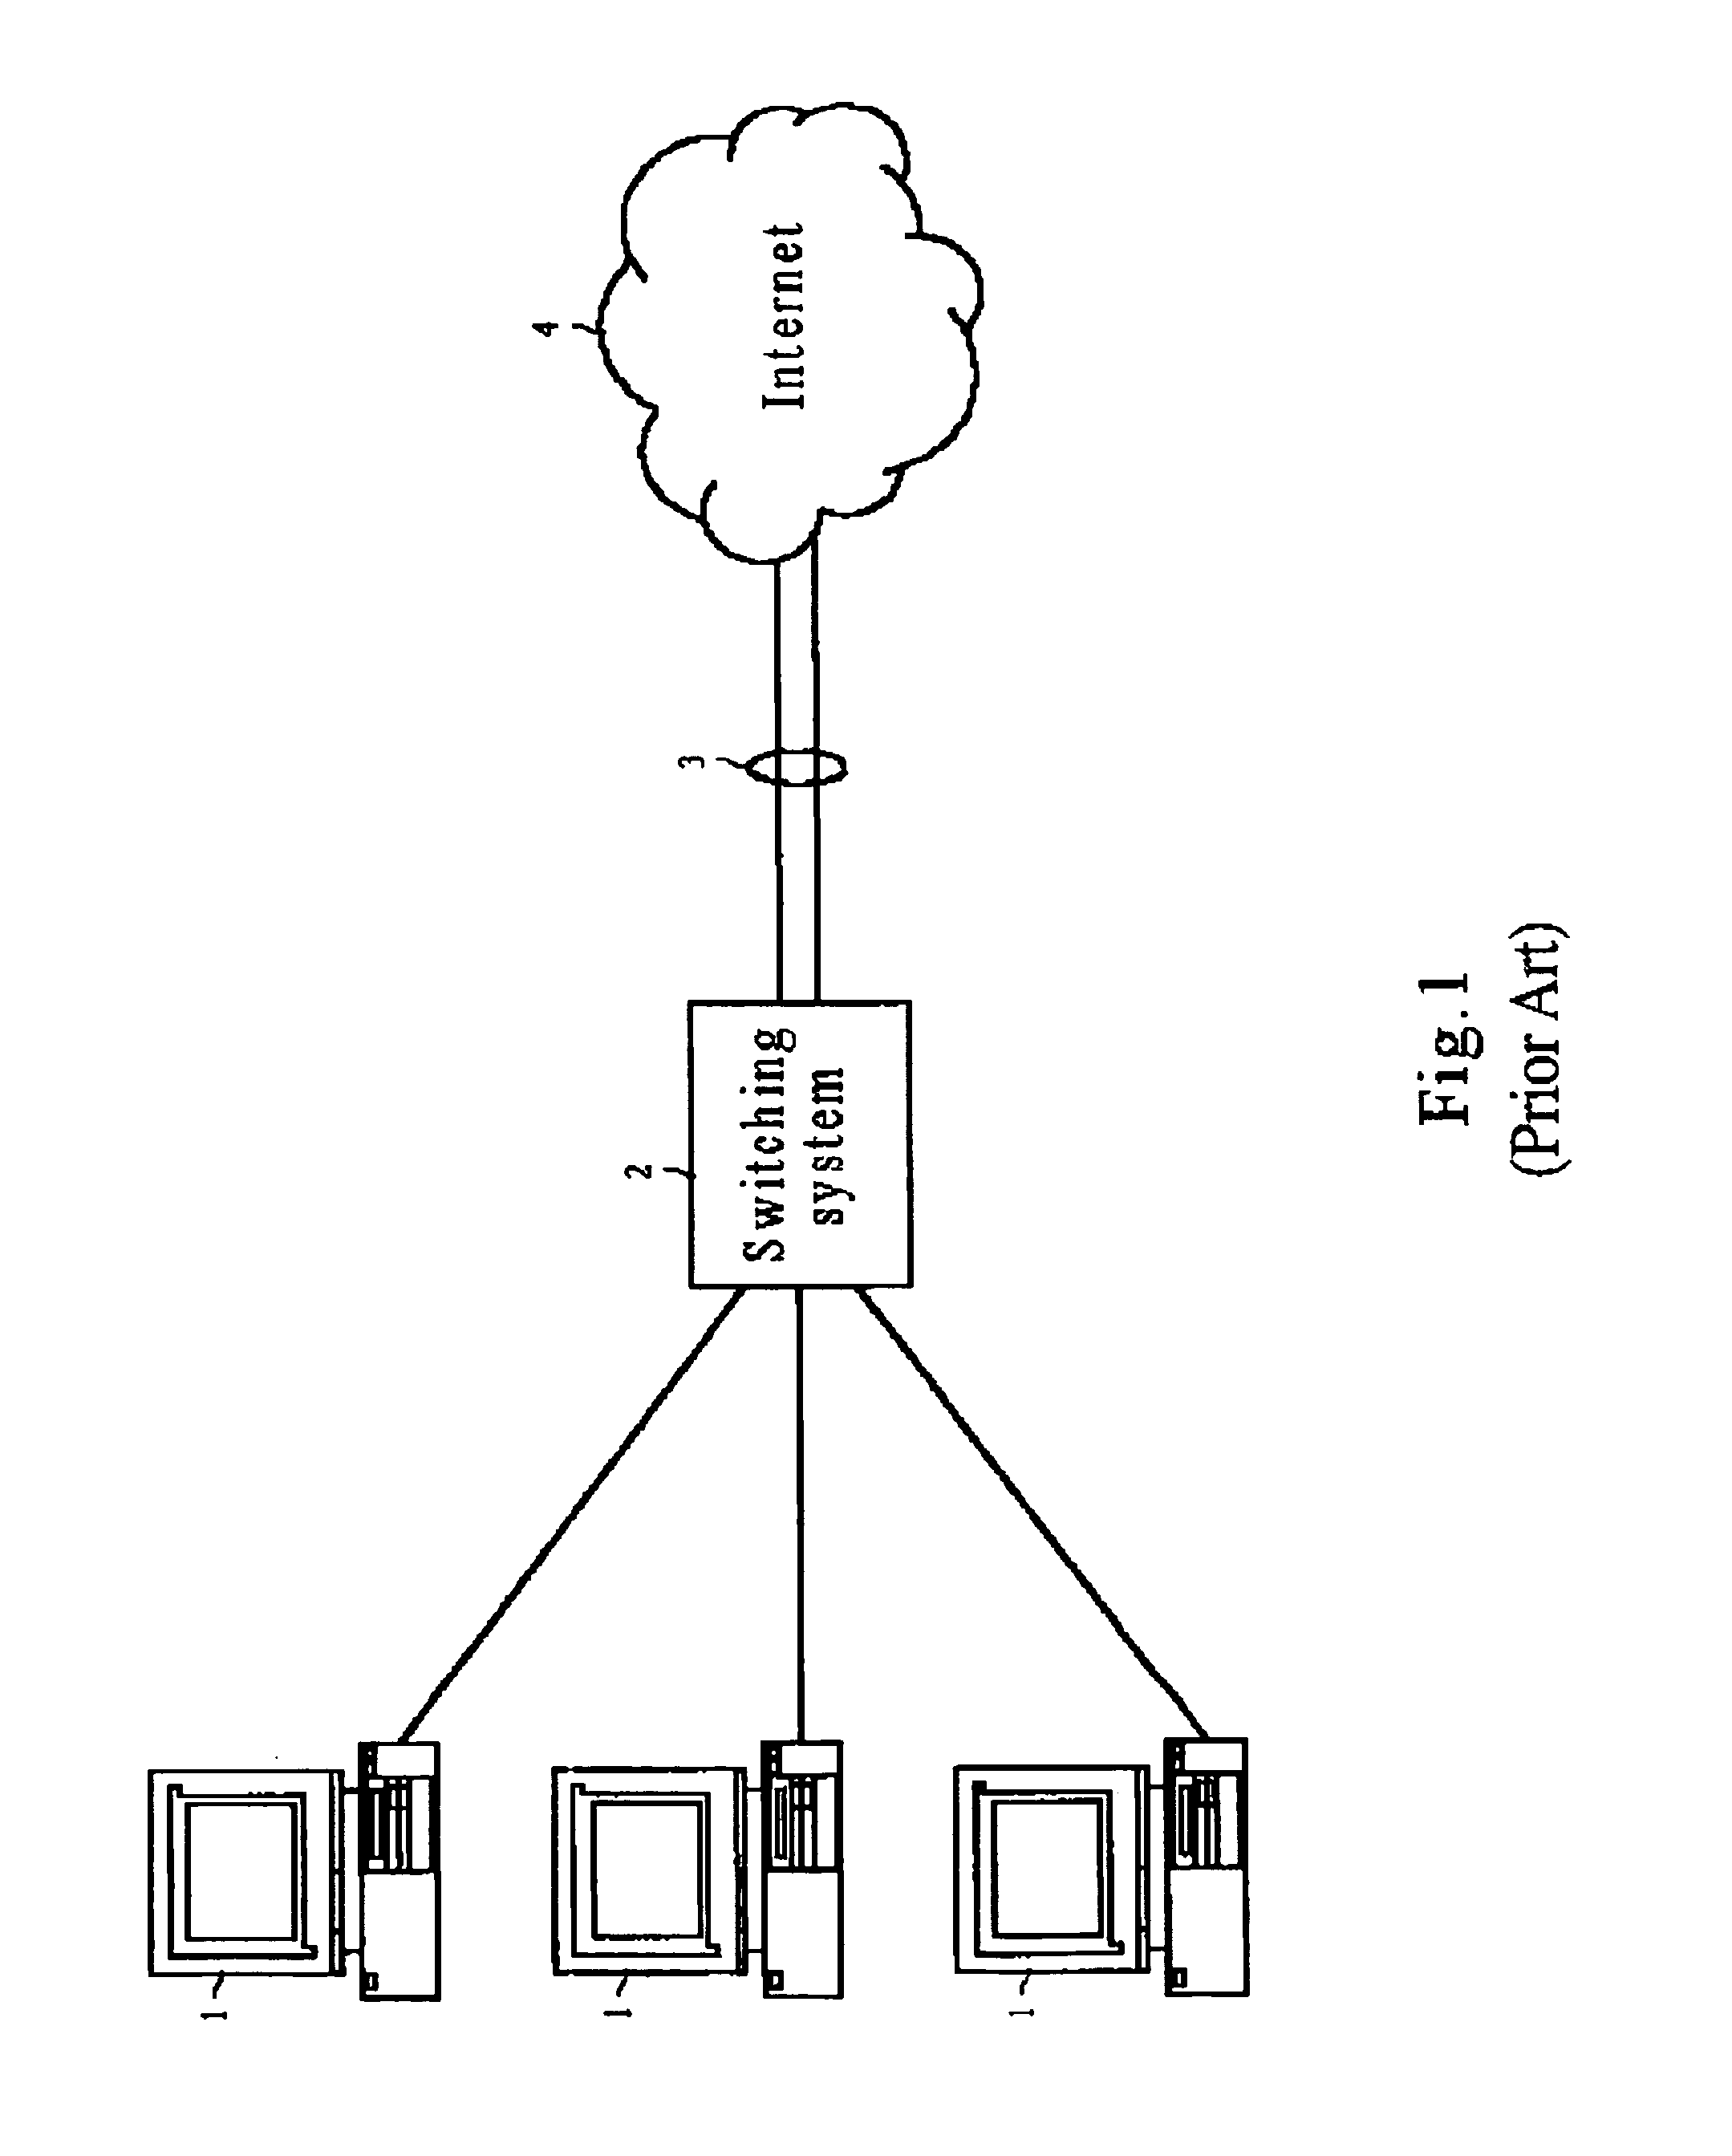 Load balance device and method for packet switching